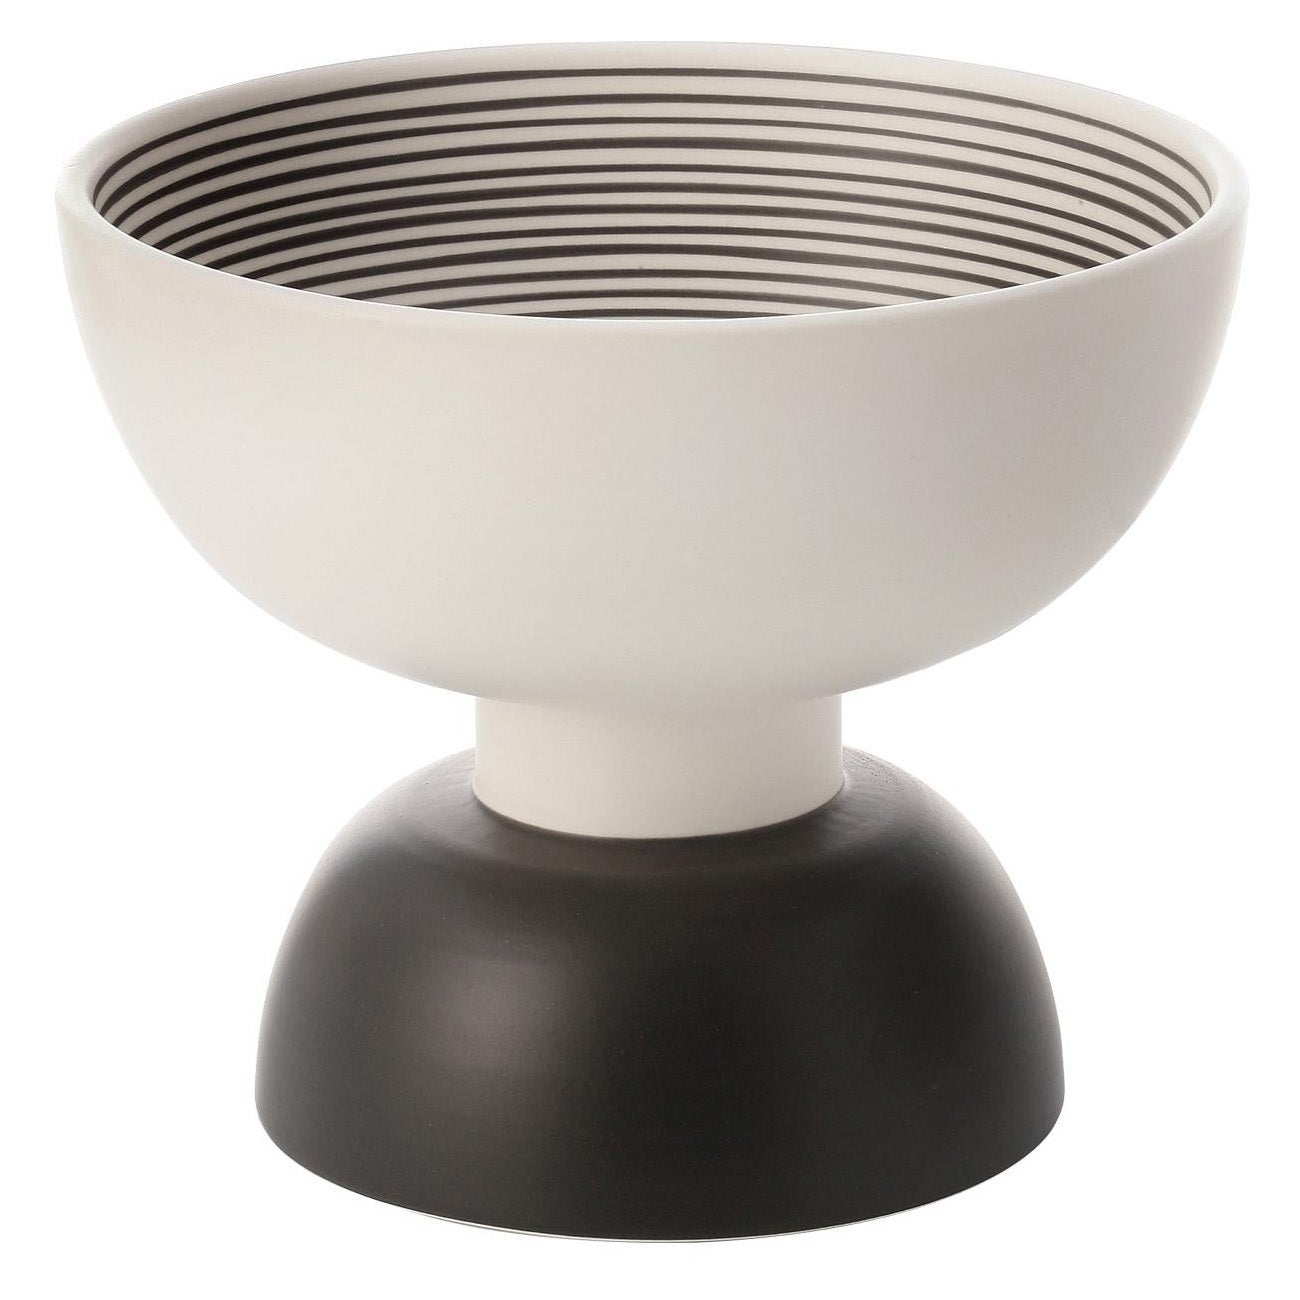 Small Black and White Centerpiece by Ettore Sottsass